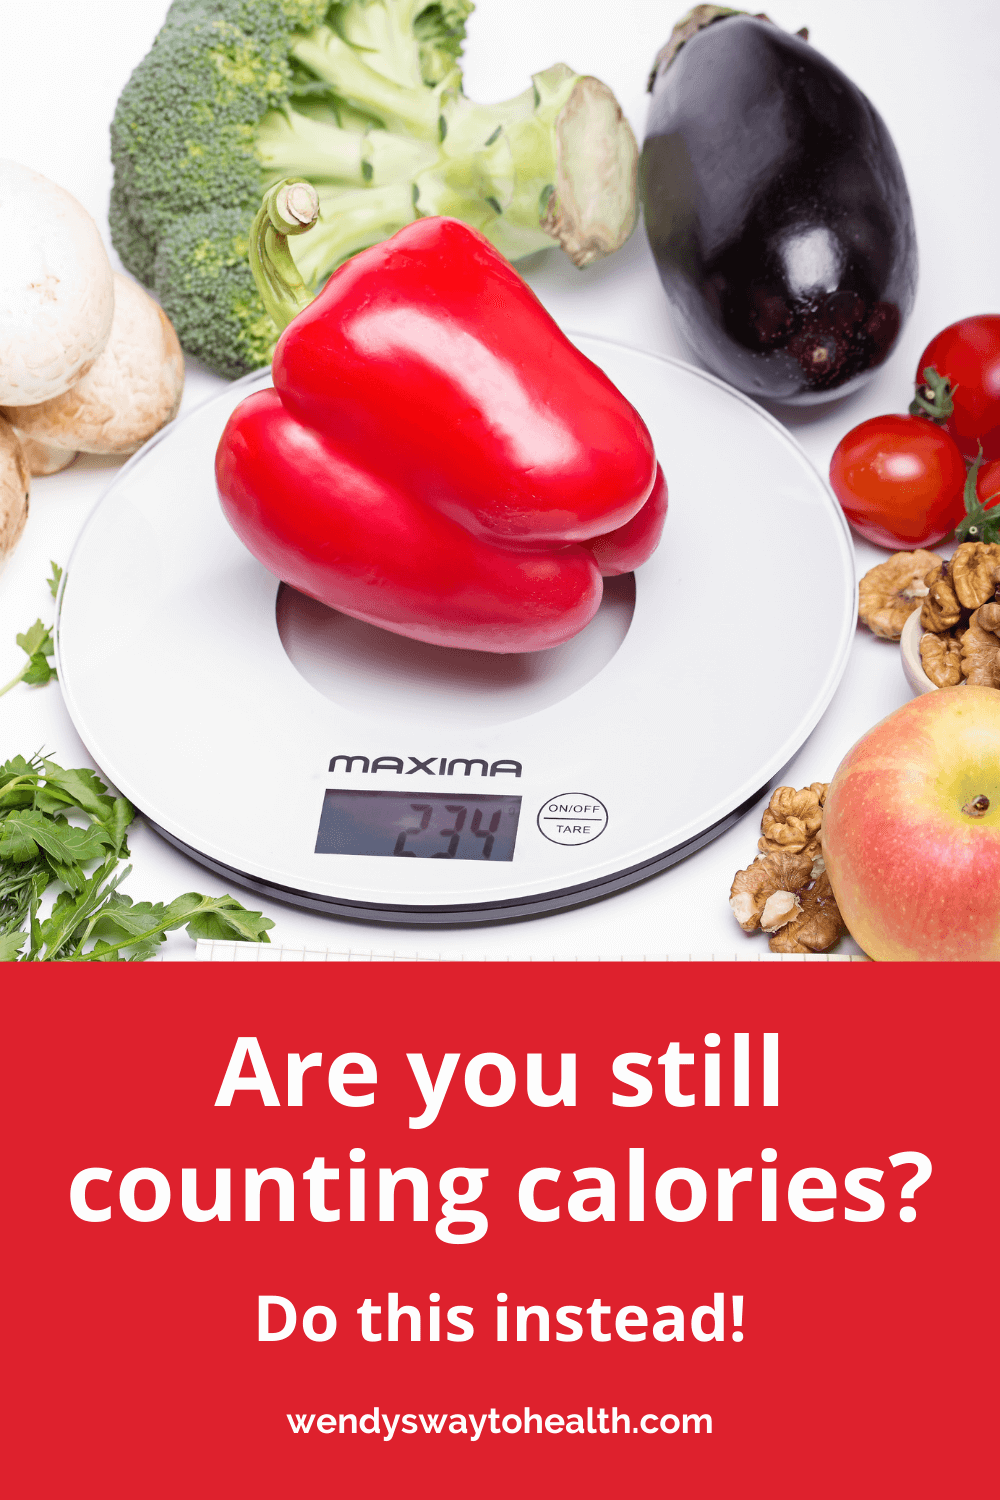 Food being weighed with text "Are you still counting calories?"